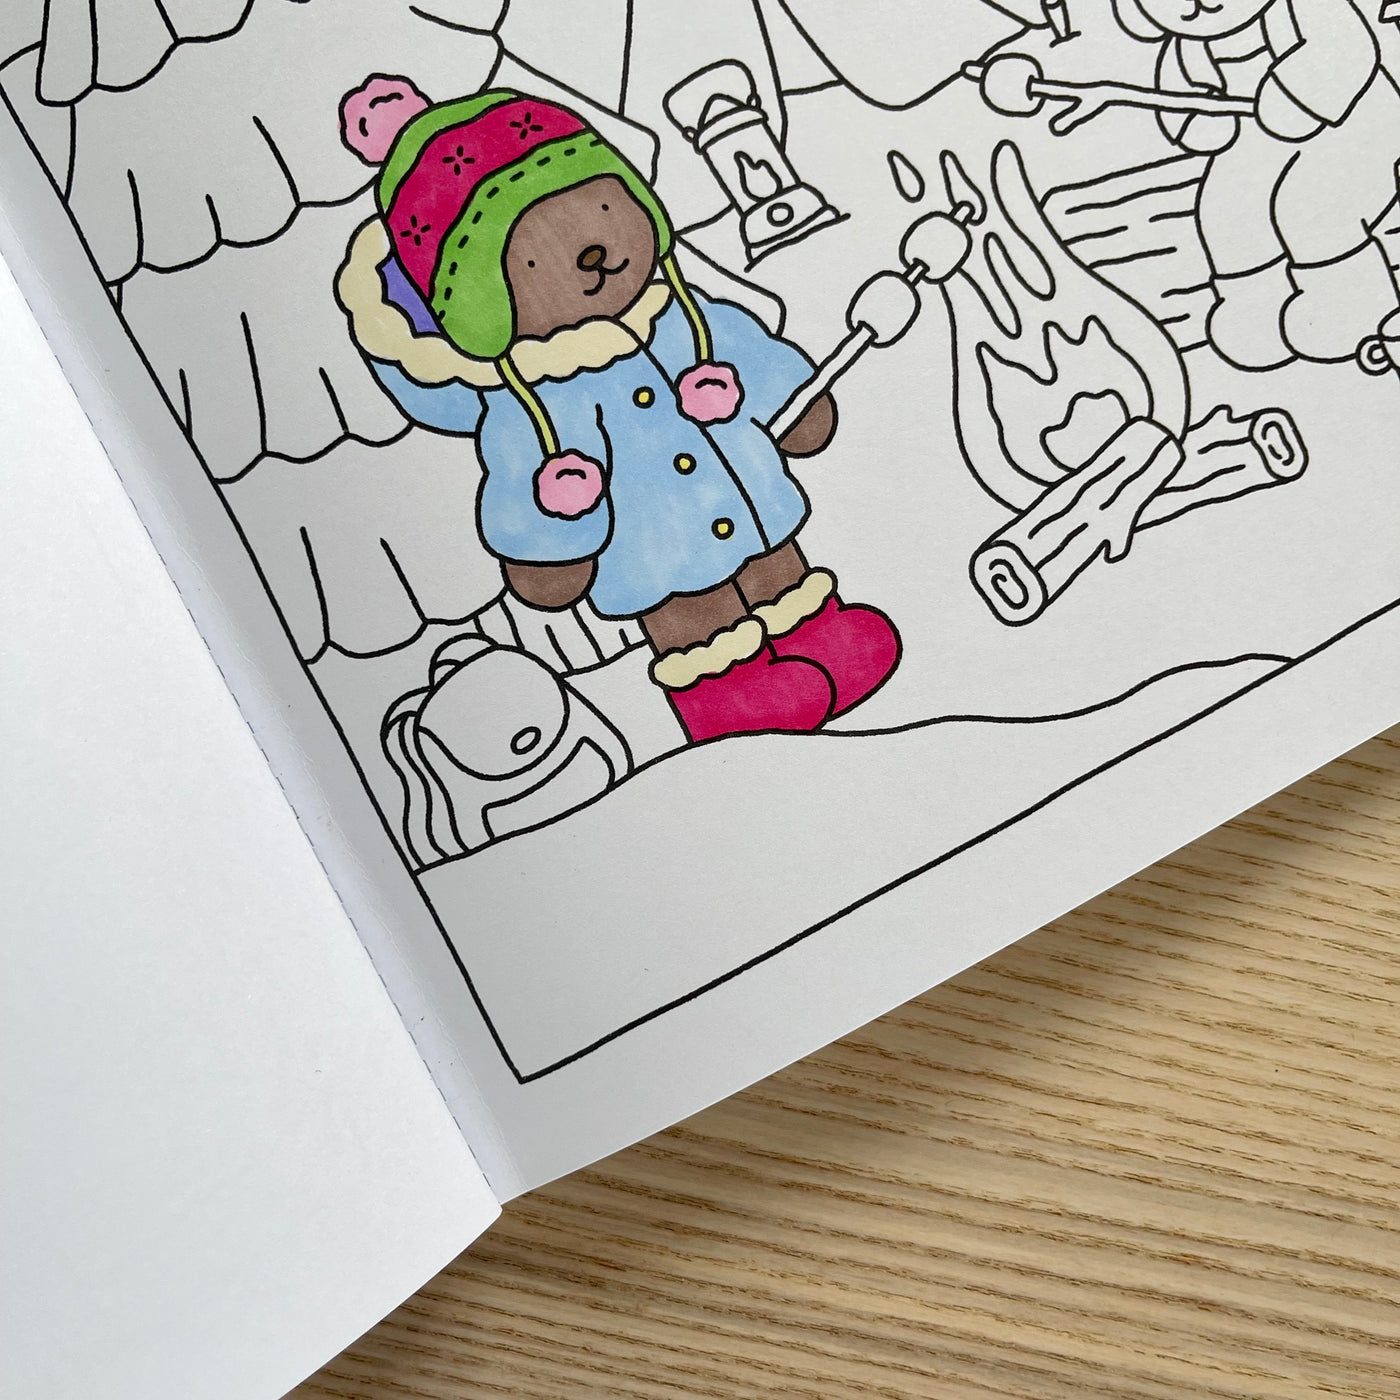 Digital Download • February Coloring Pages – Bobbie Goods